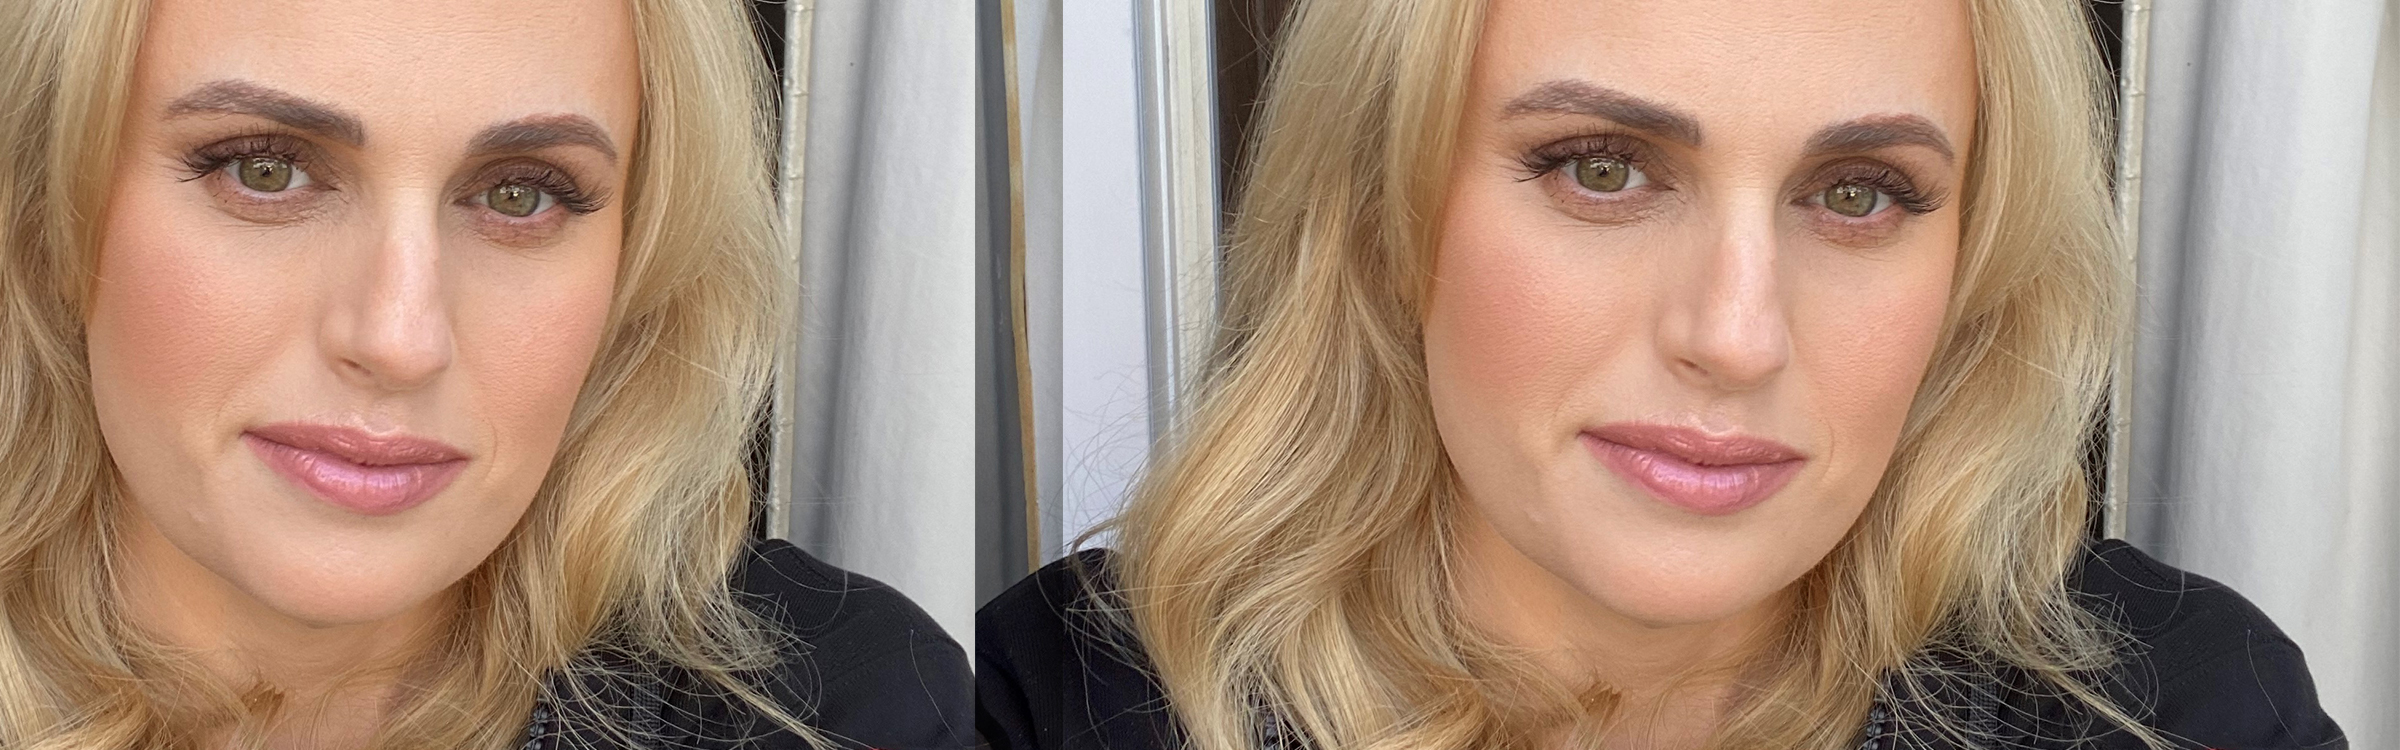 Rebel Wilson Is 41, Crushing It, and Finally "Stepping Into Her Own Power"